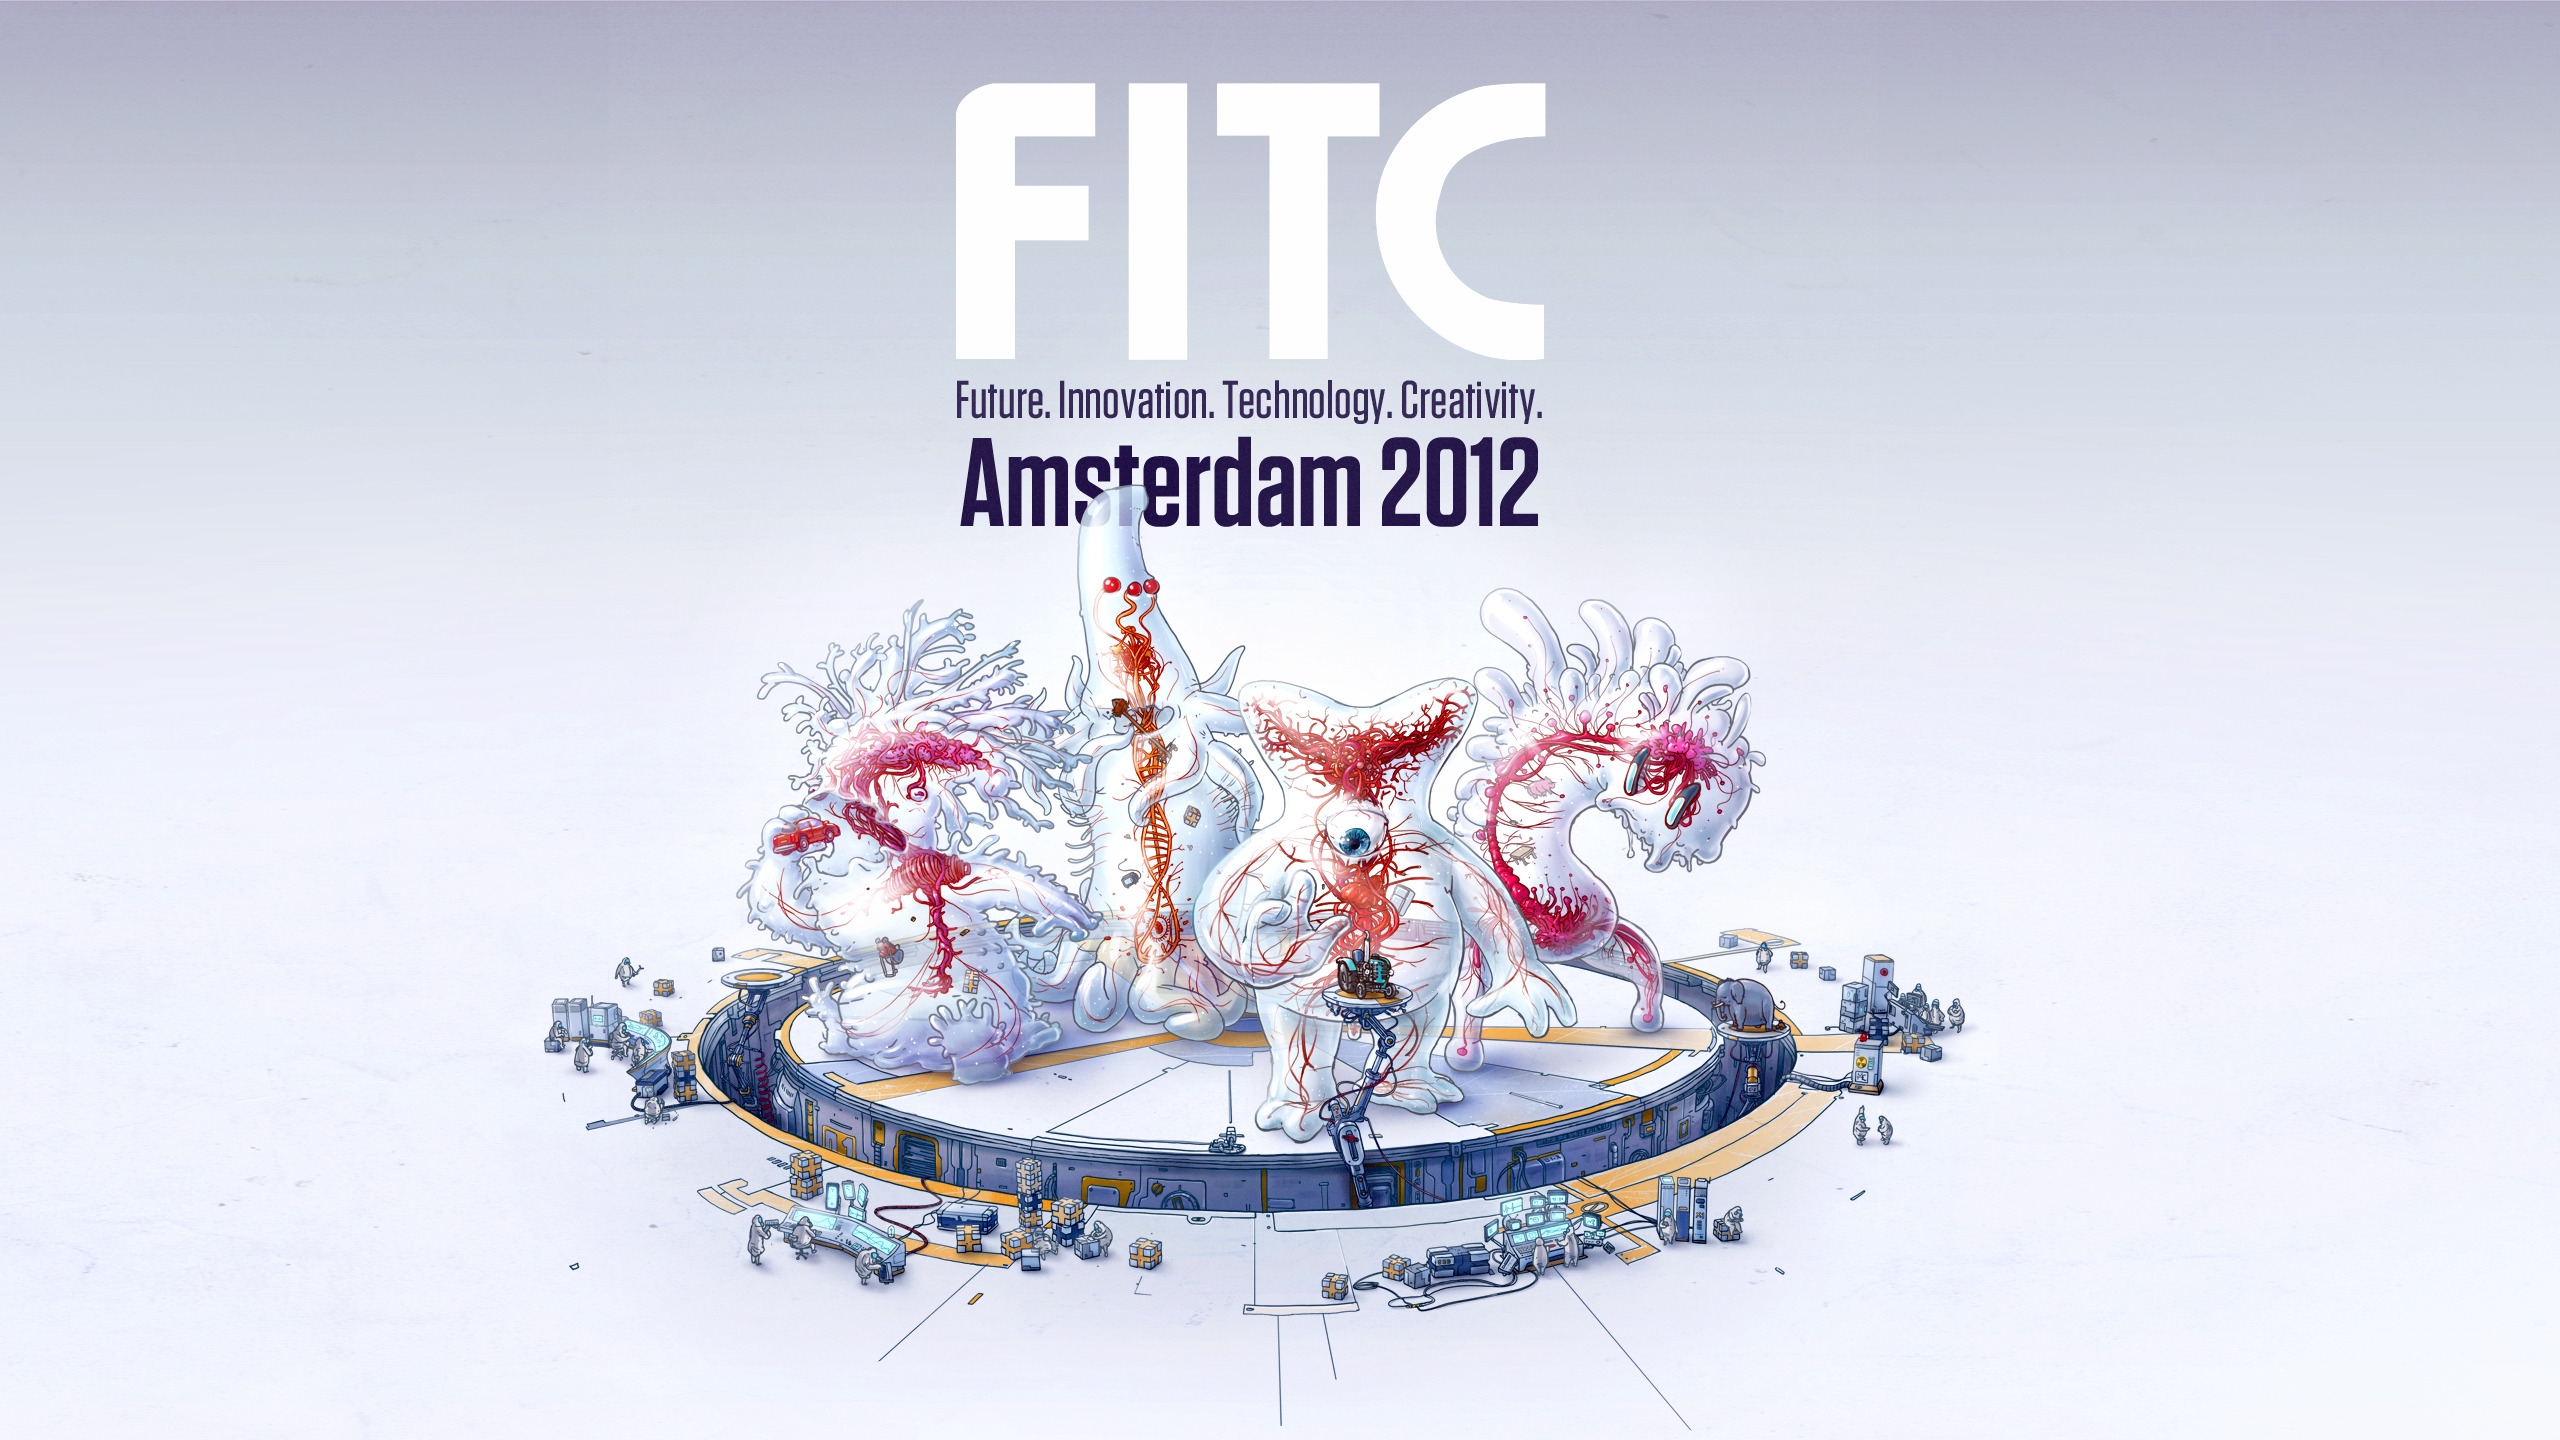 FITC 2012 Amsterdam for 2560x1440 HDTV resolution